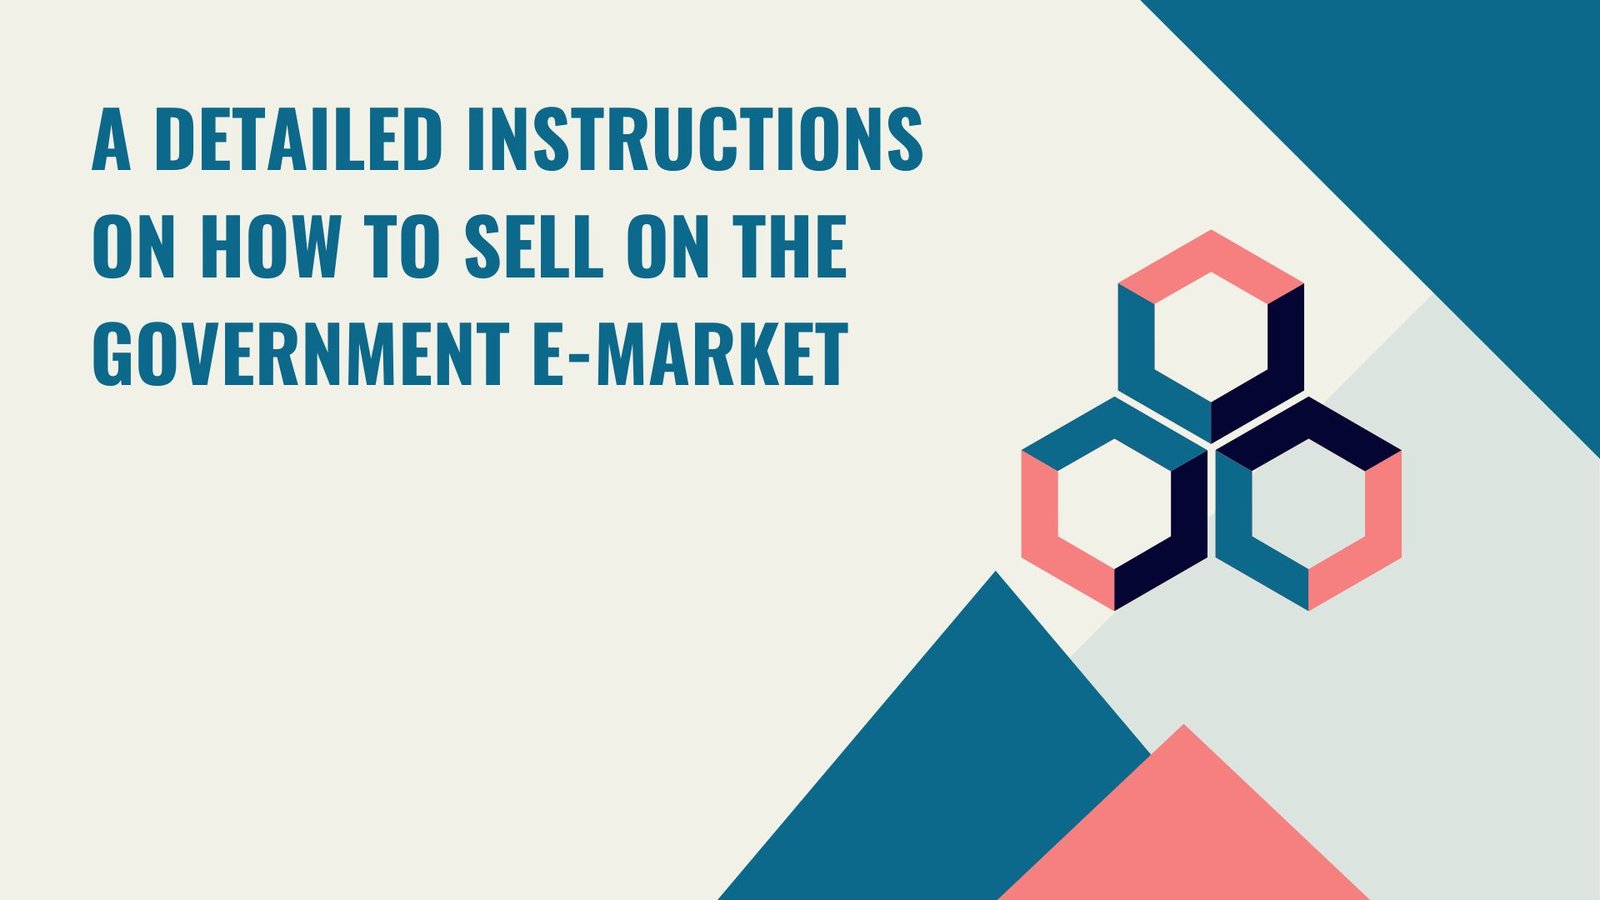 A Detailed instructions on how to sell on the Government e-Market